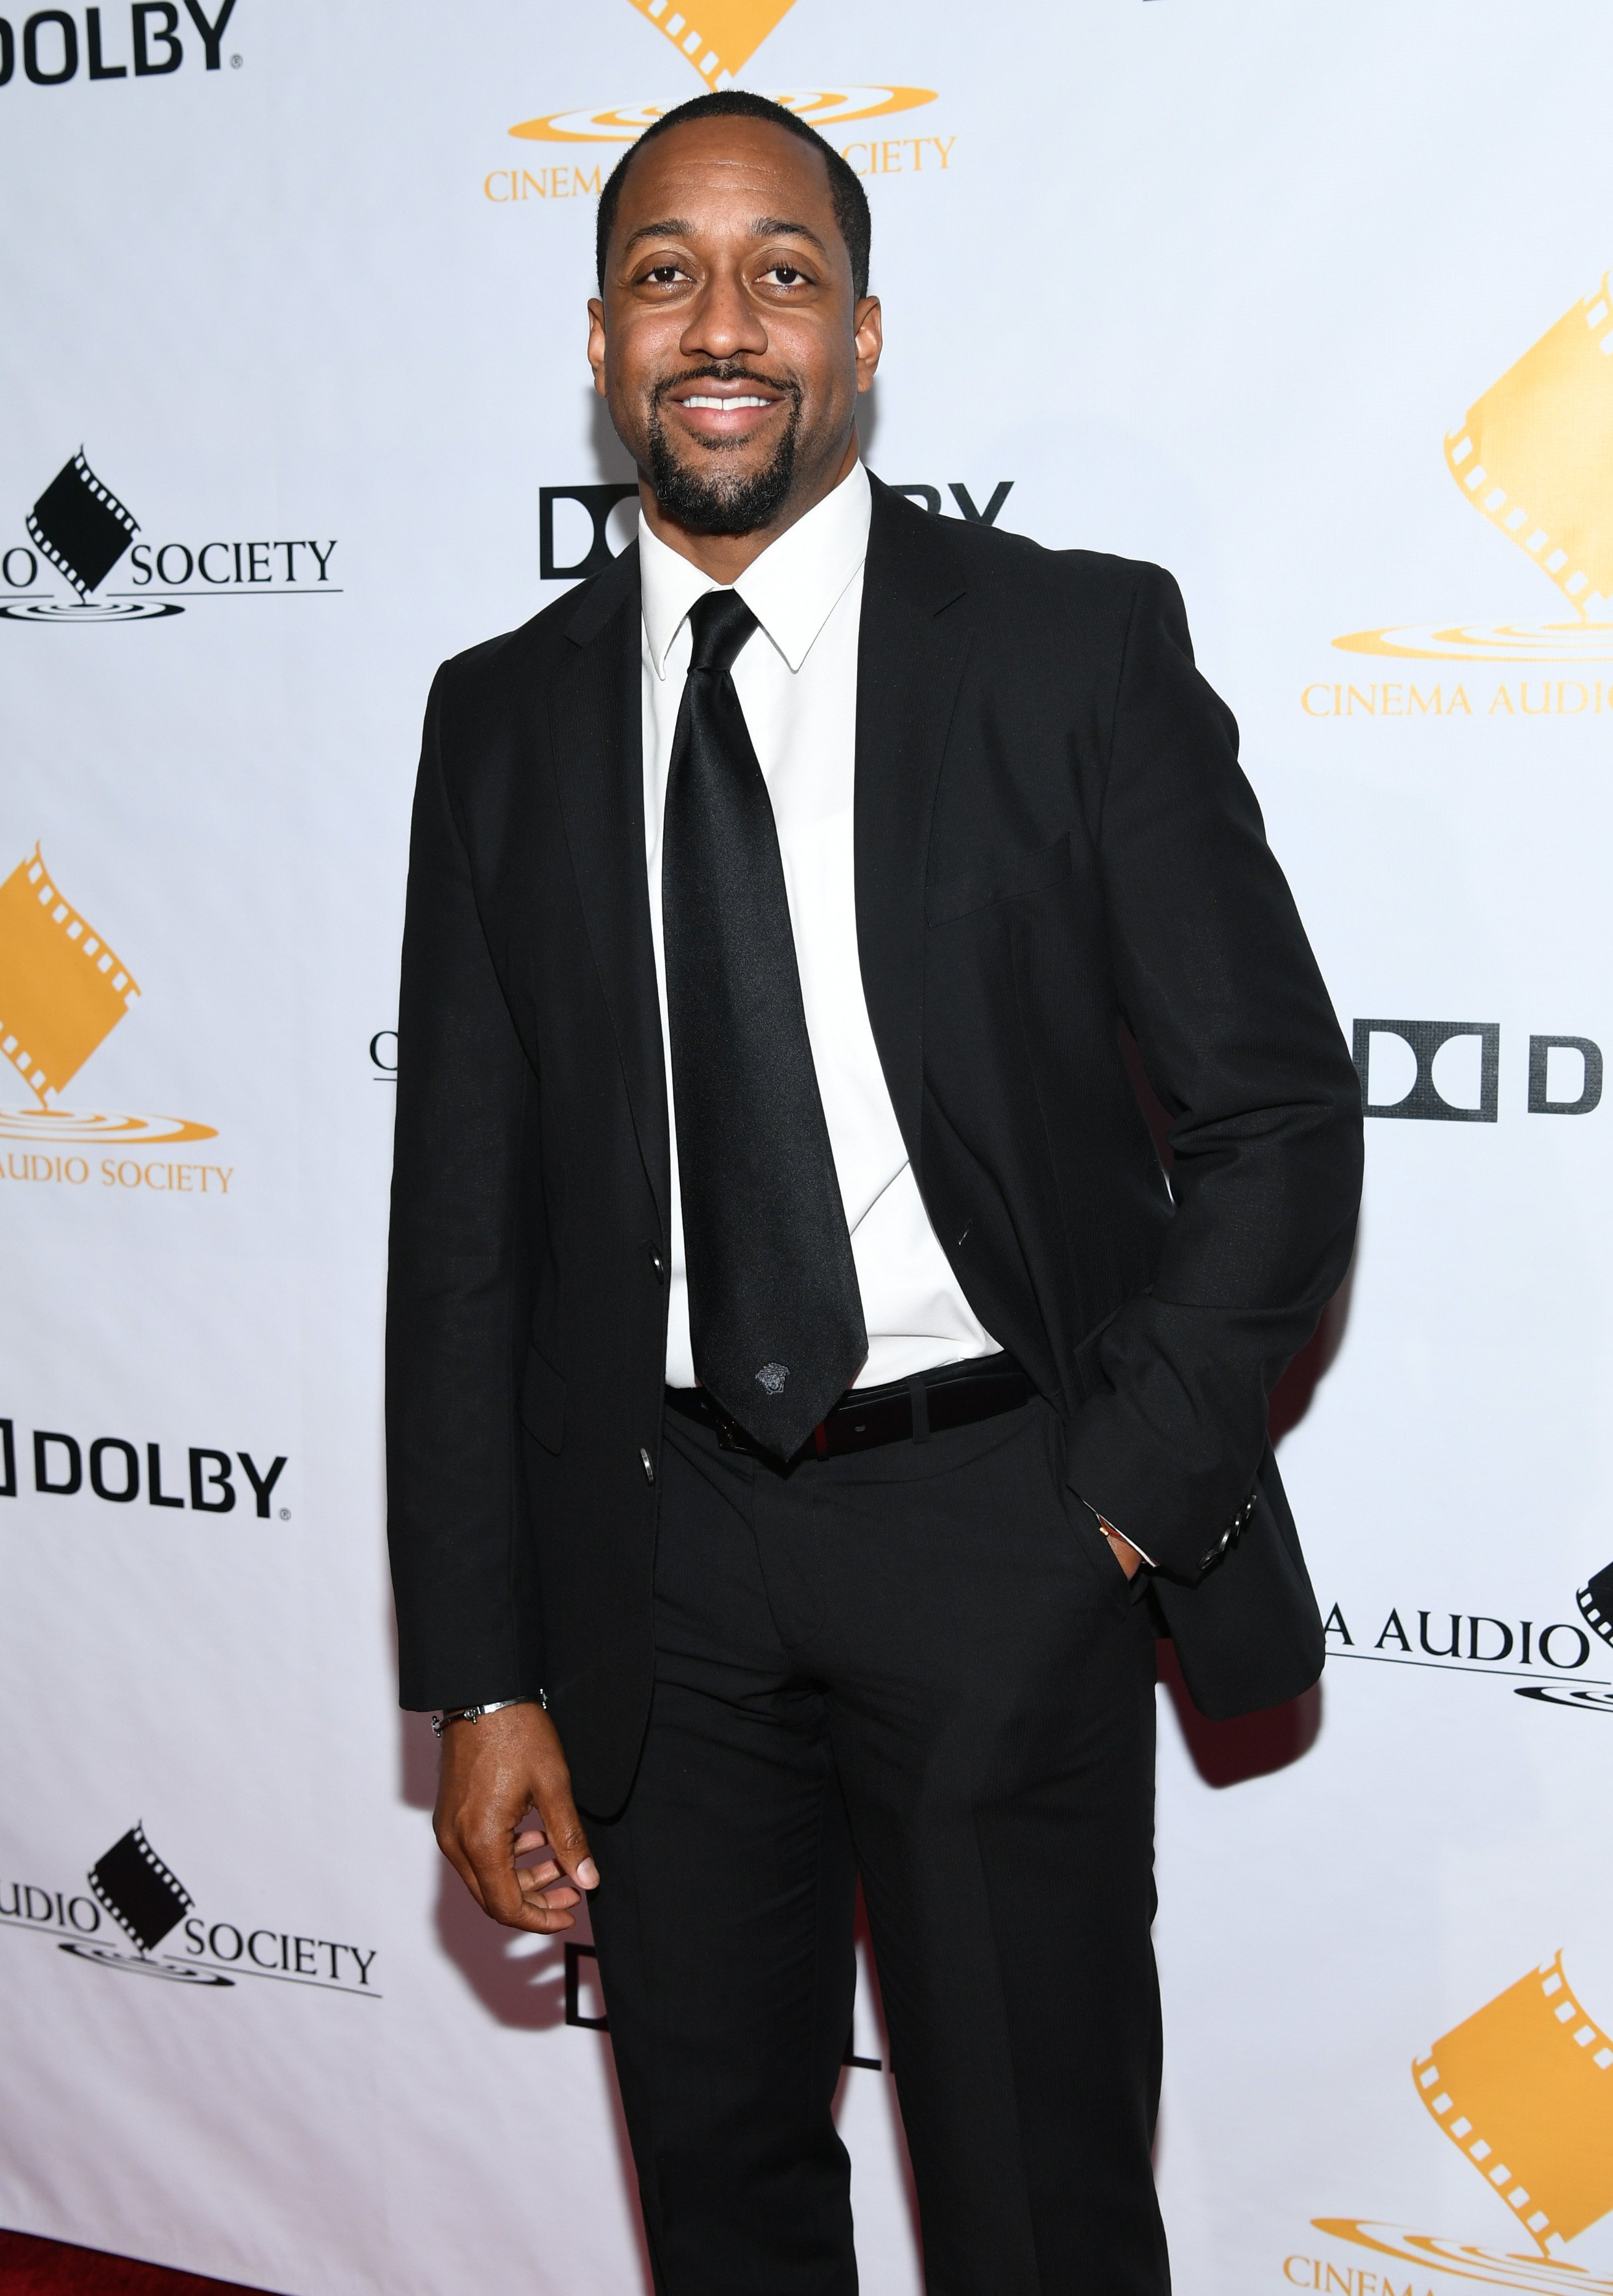 Jaleel White on February 24, 2018 in Los Angeles, California | Photo: Getty Images